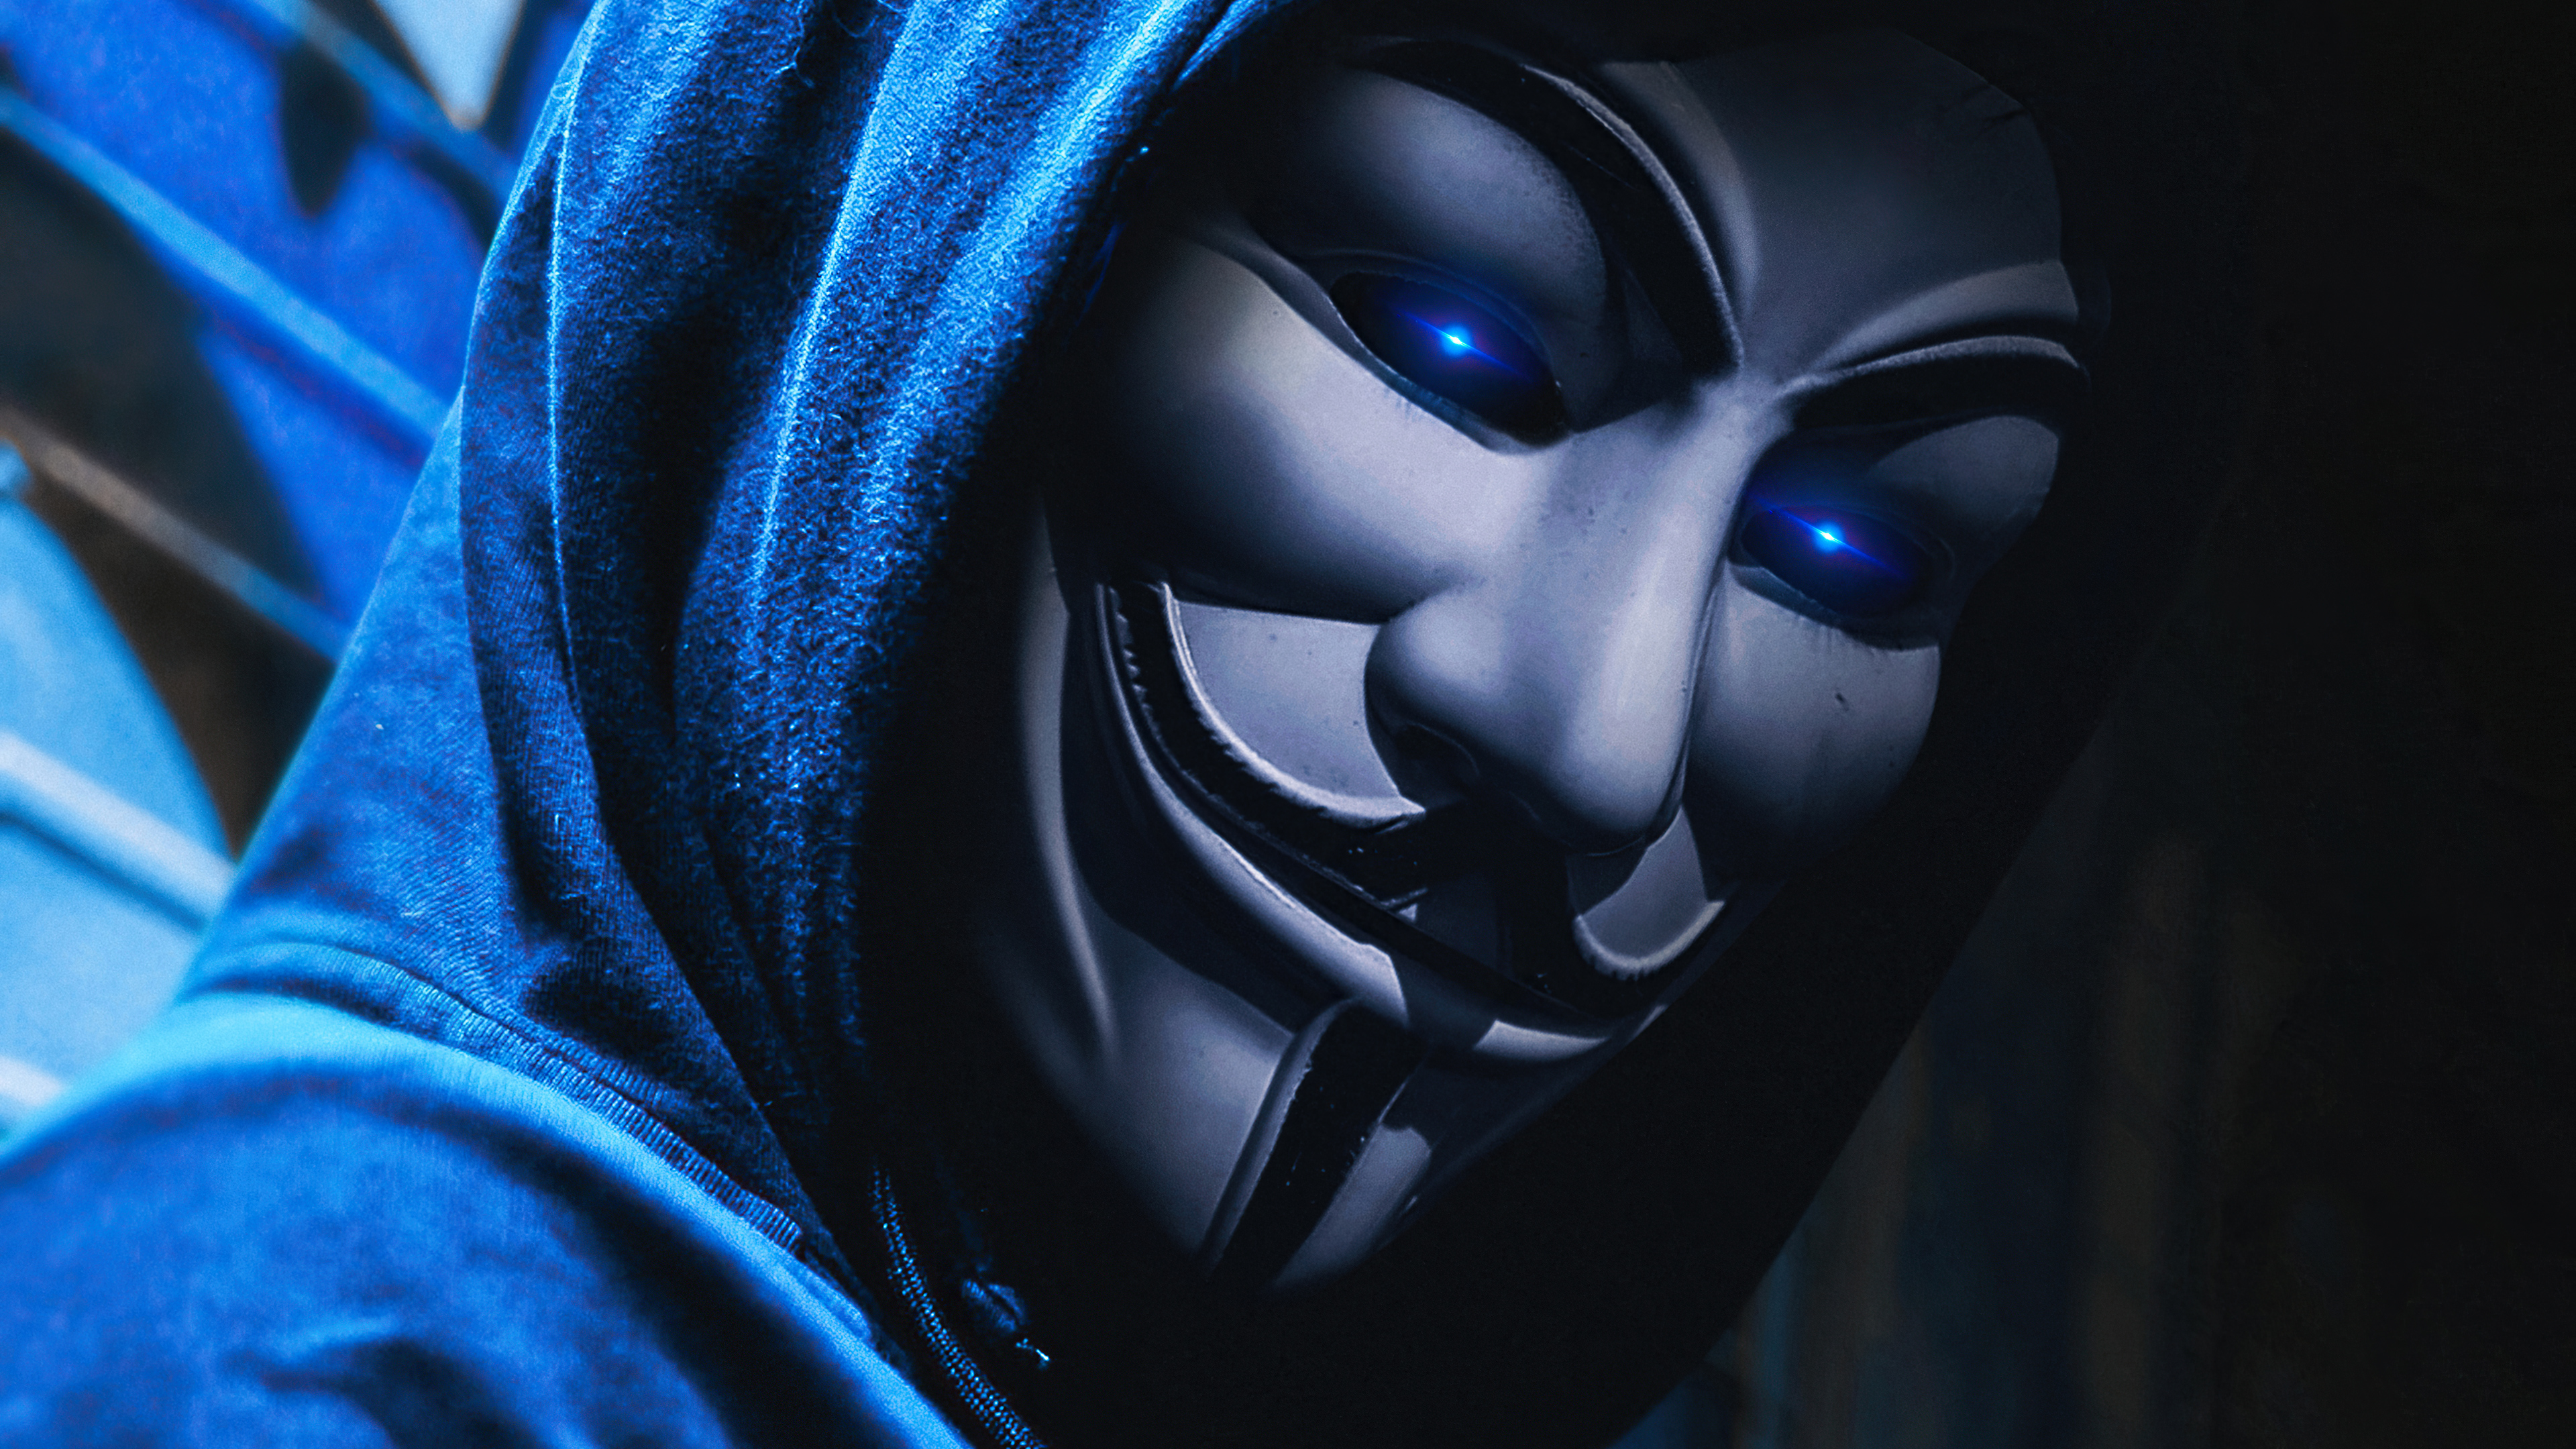 Anonymus guy white mask k hd photography k wallpapers images backgrounds photos and pictures